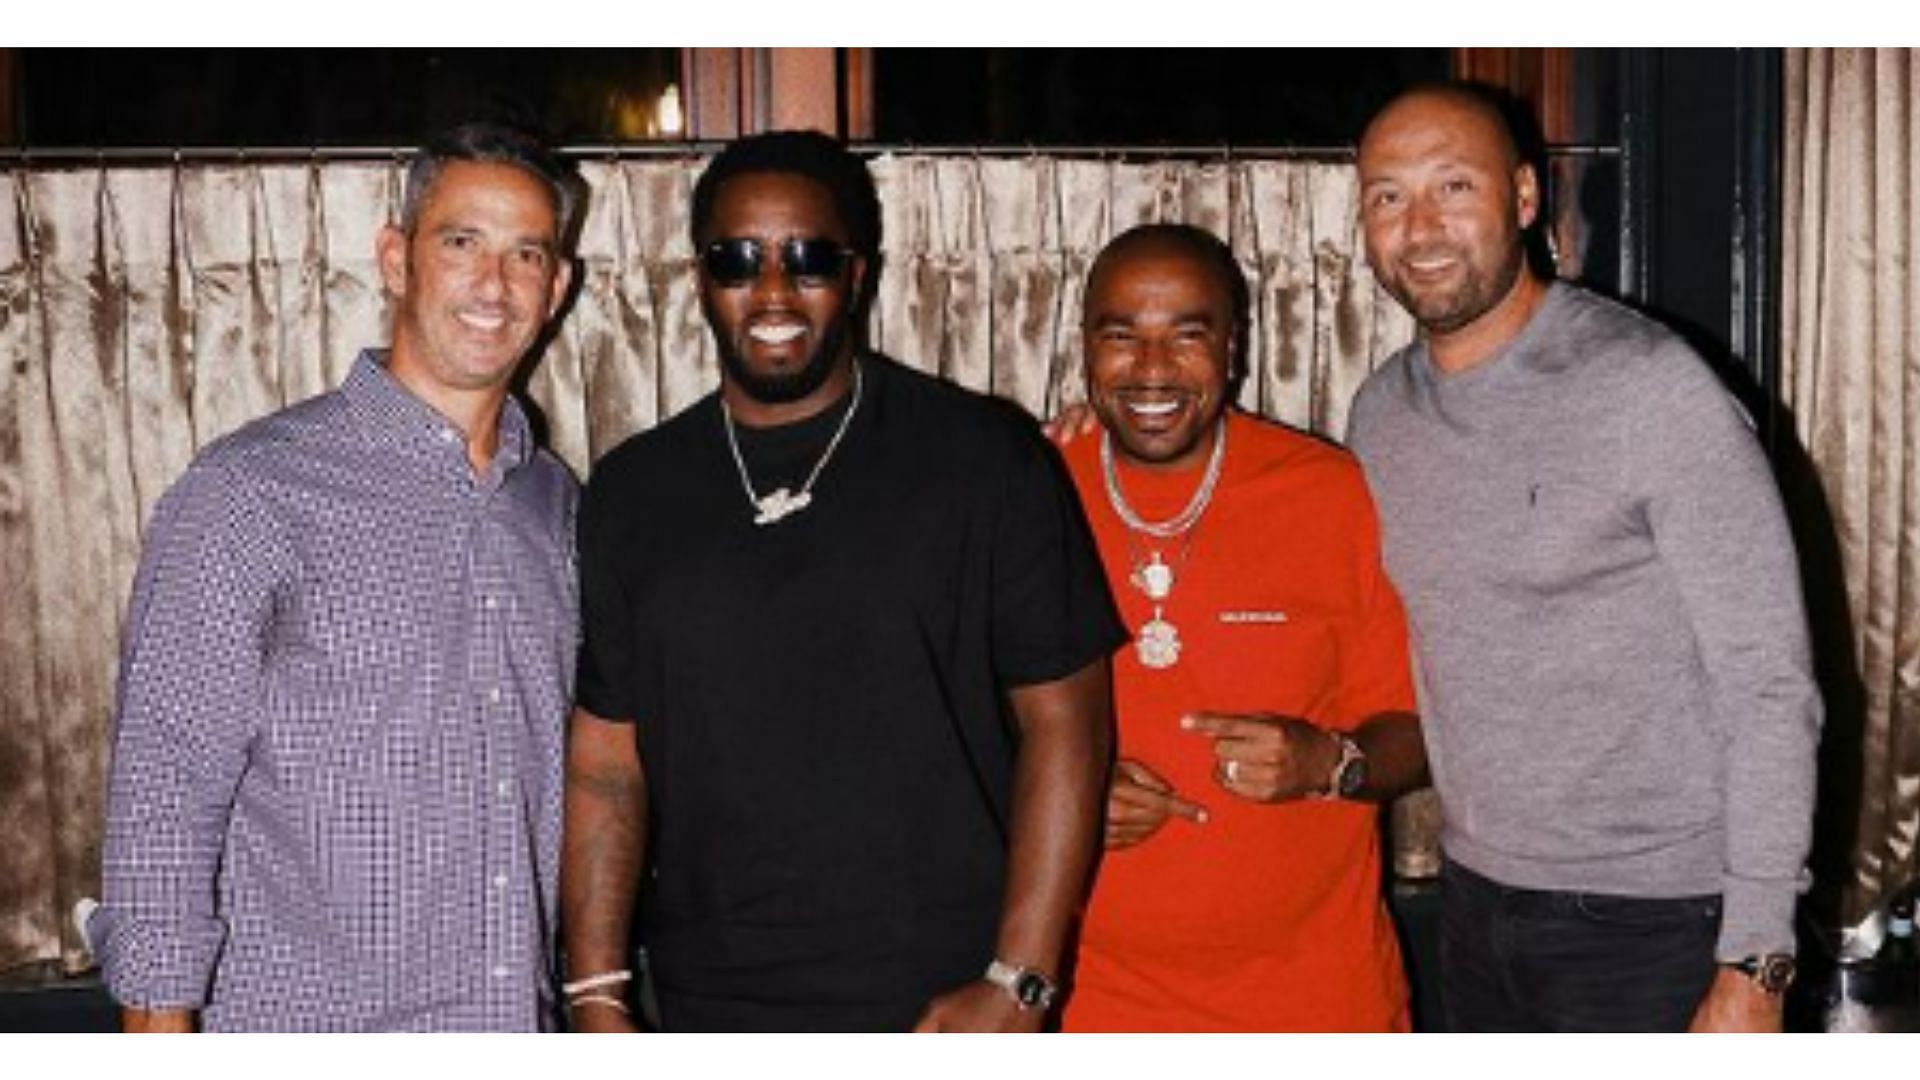 Derek Jeter and Jorge Posada with rappers P. Diddy and N.O.R.E. in NYC